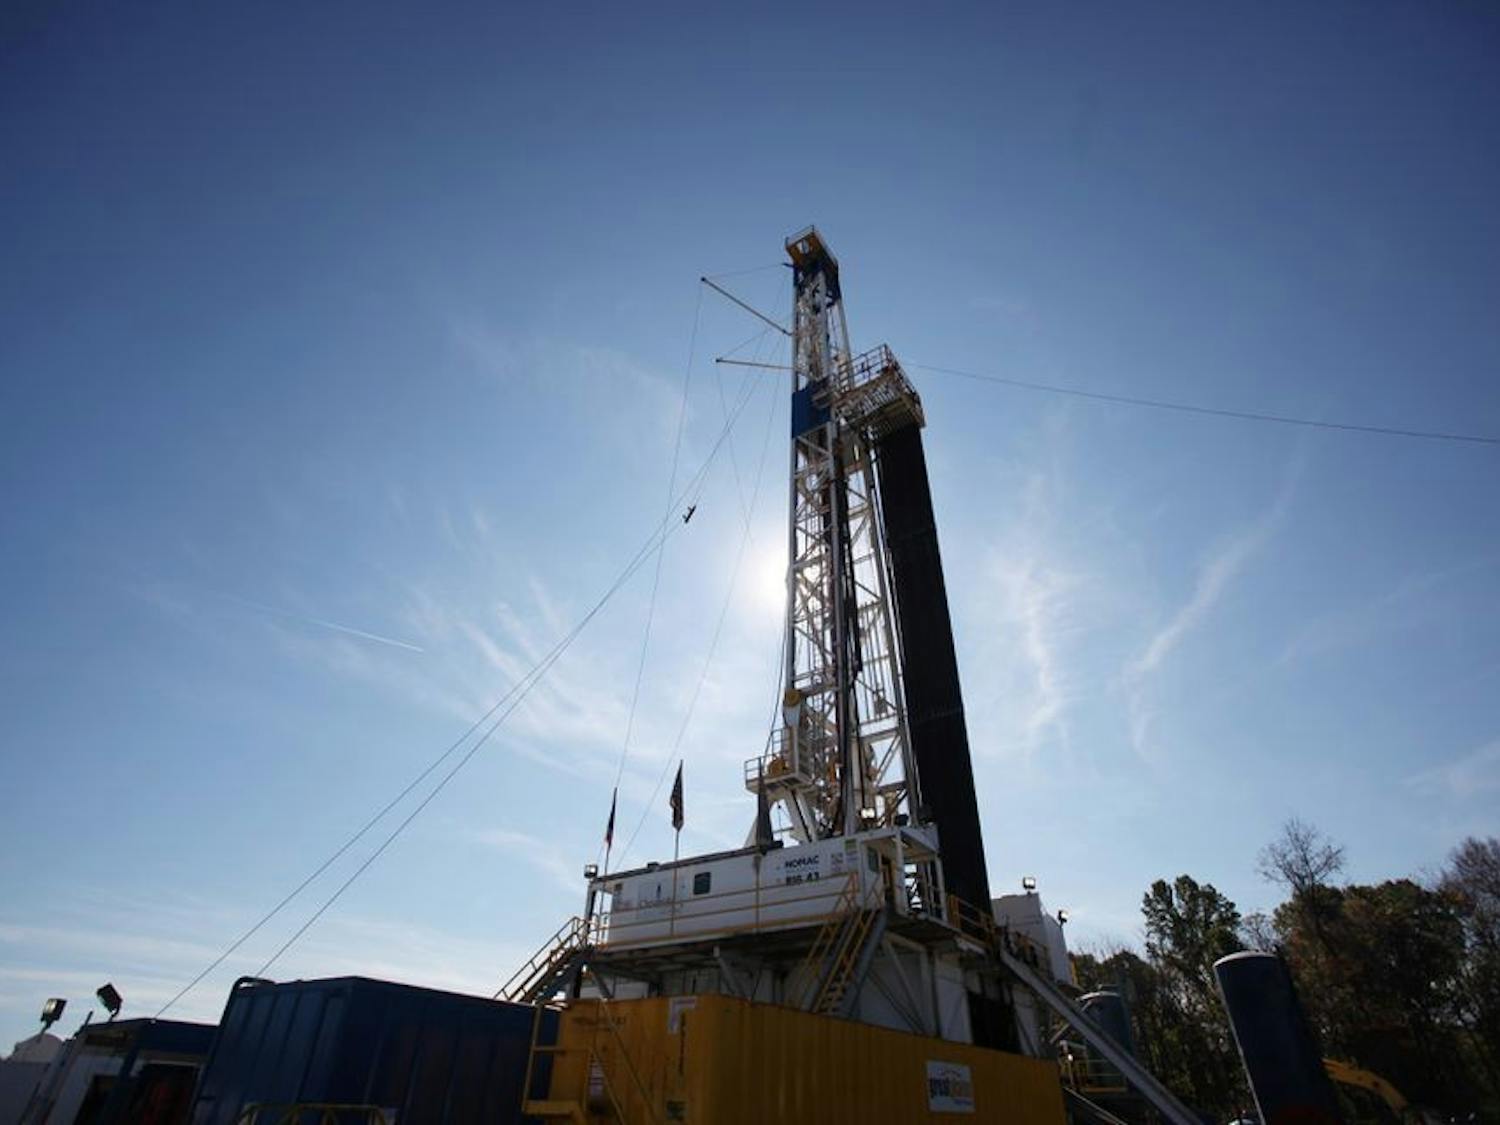 A hydraulic fracturing, or fracking, rig is seen Oct. 17, 2011, on the Utica Shale formation in Ohio. TNS/Gus Chan